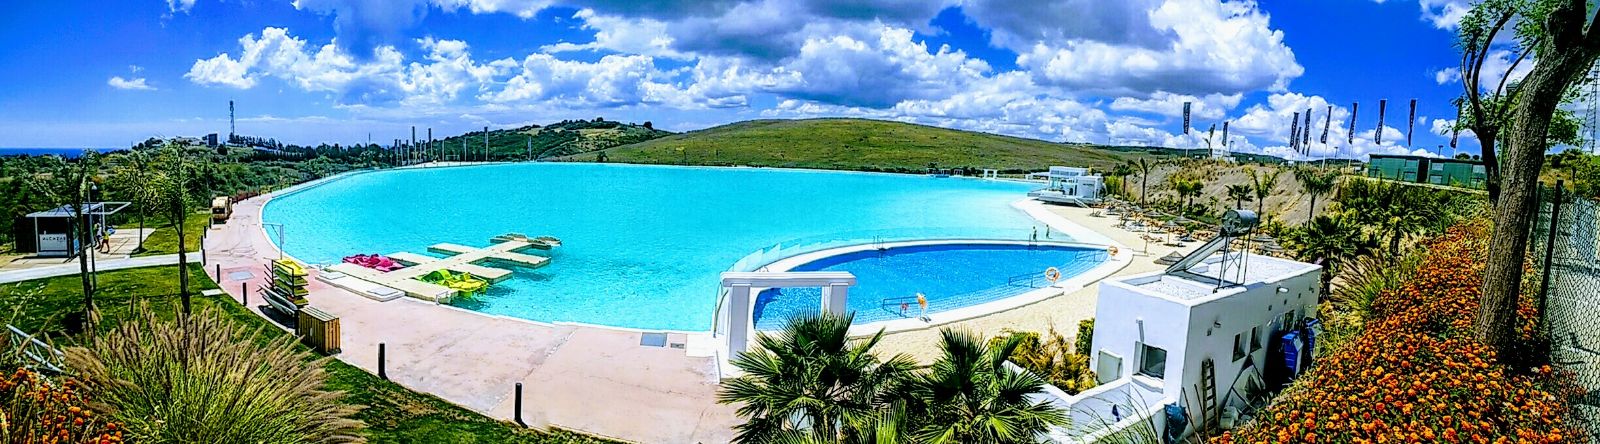 Image shows panoramic view of the crystal lagoon and blue skies